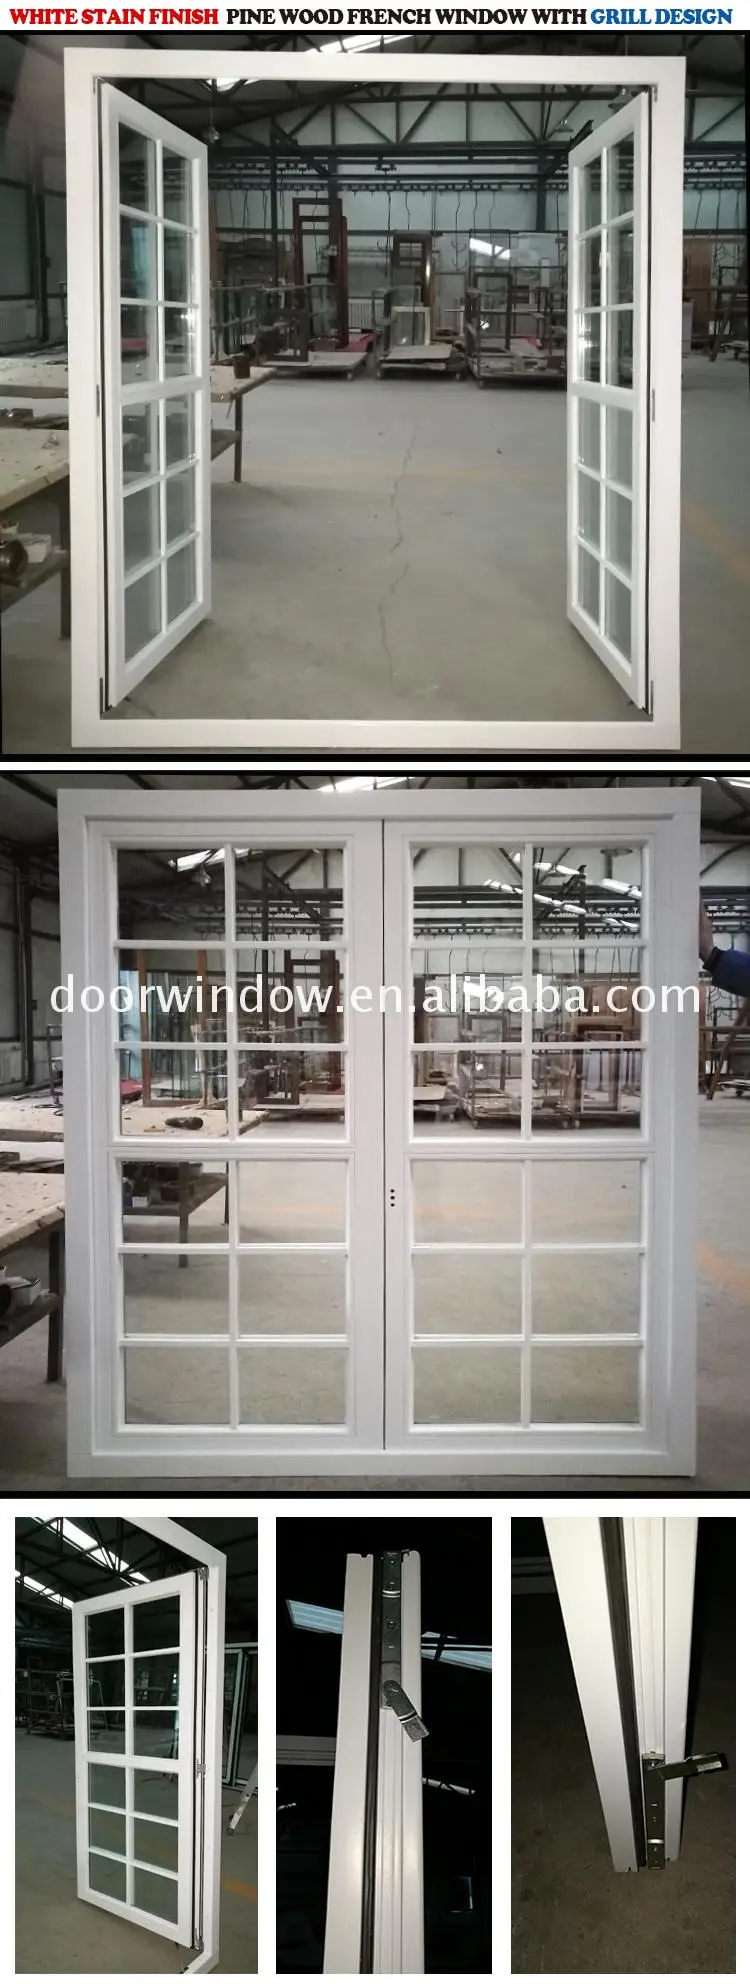 30 x 62 window modern house french windows 60 replacement